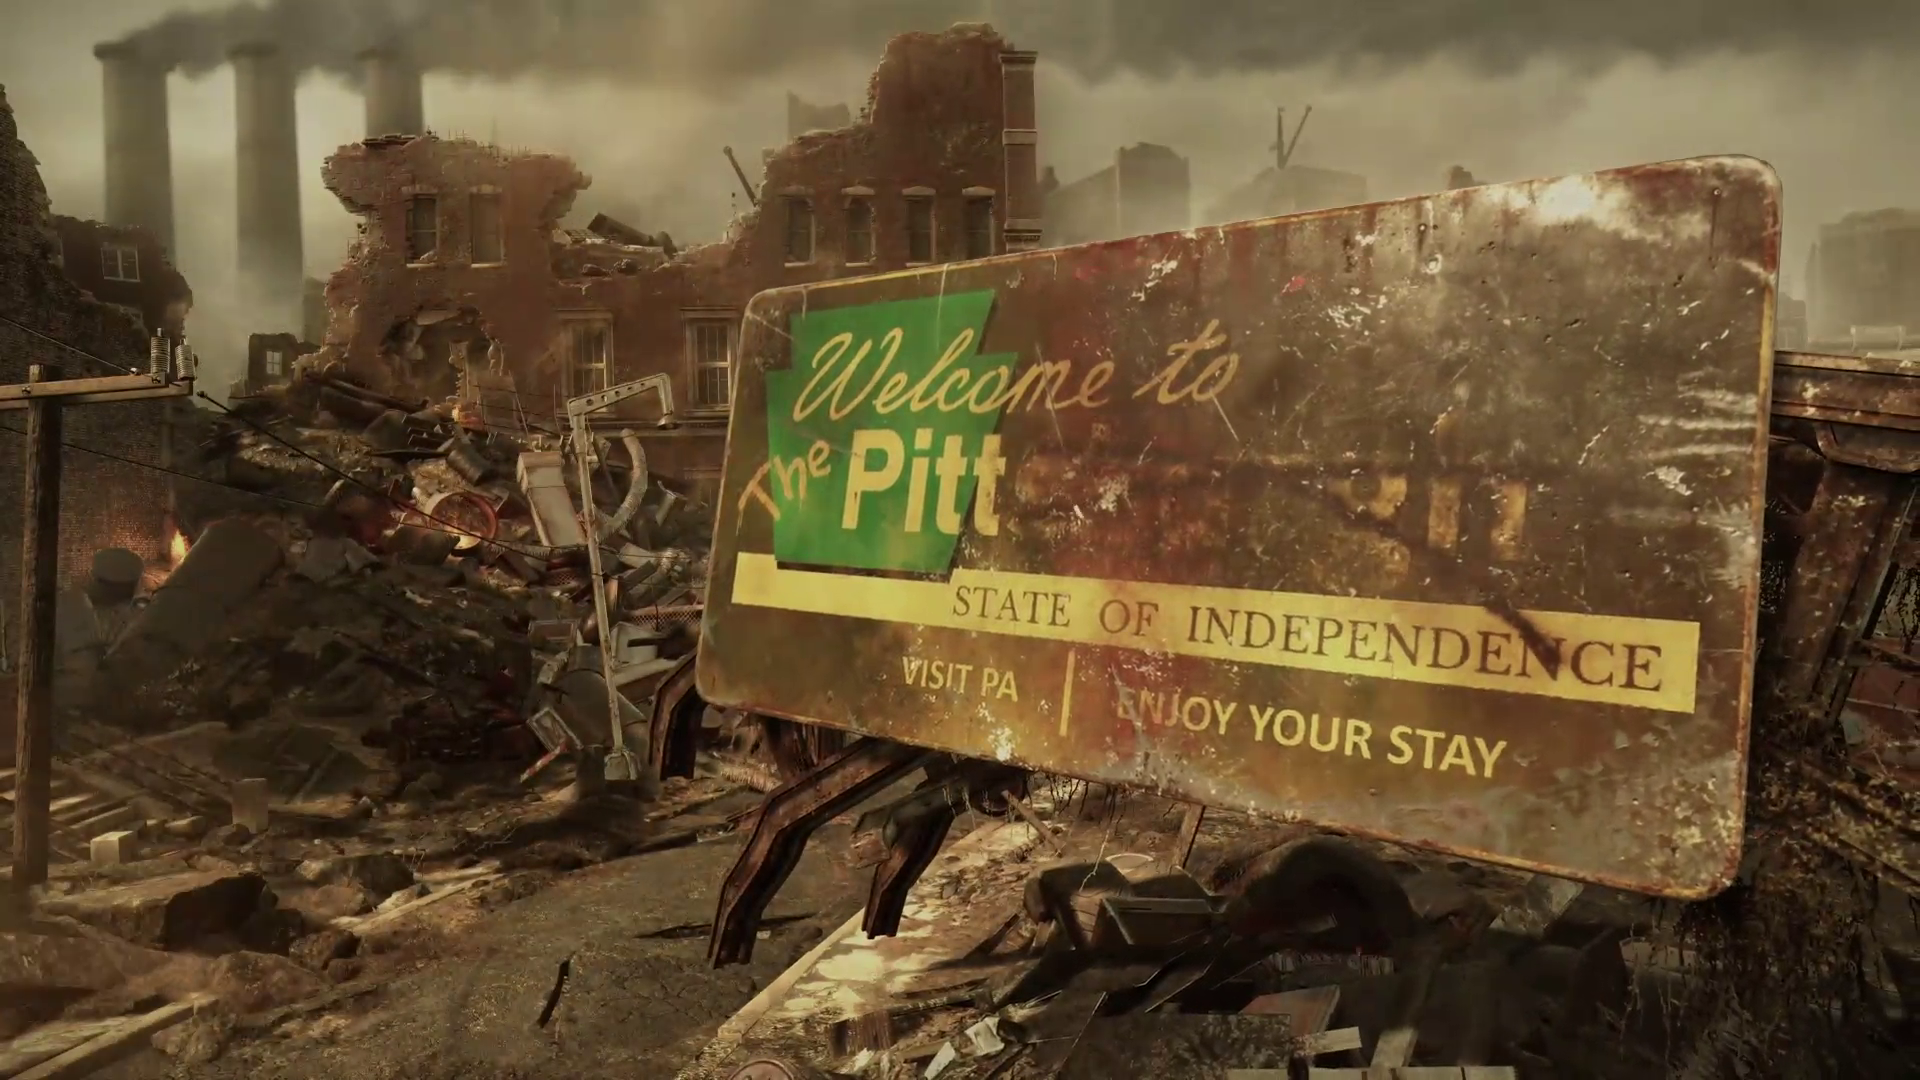 a “Welcome to The Pitt State of Independence” sign in Fallout 76